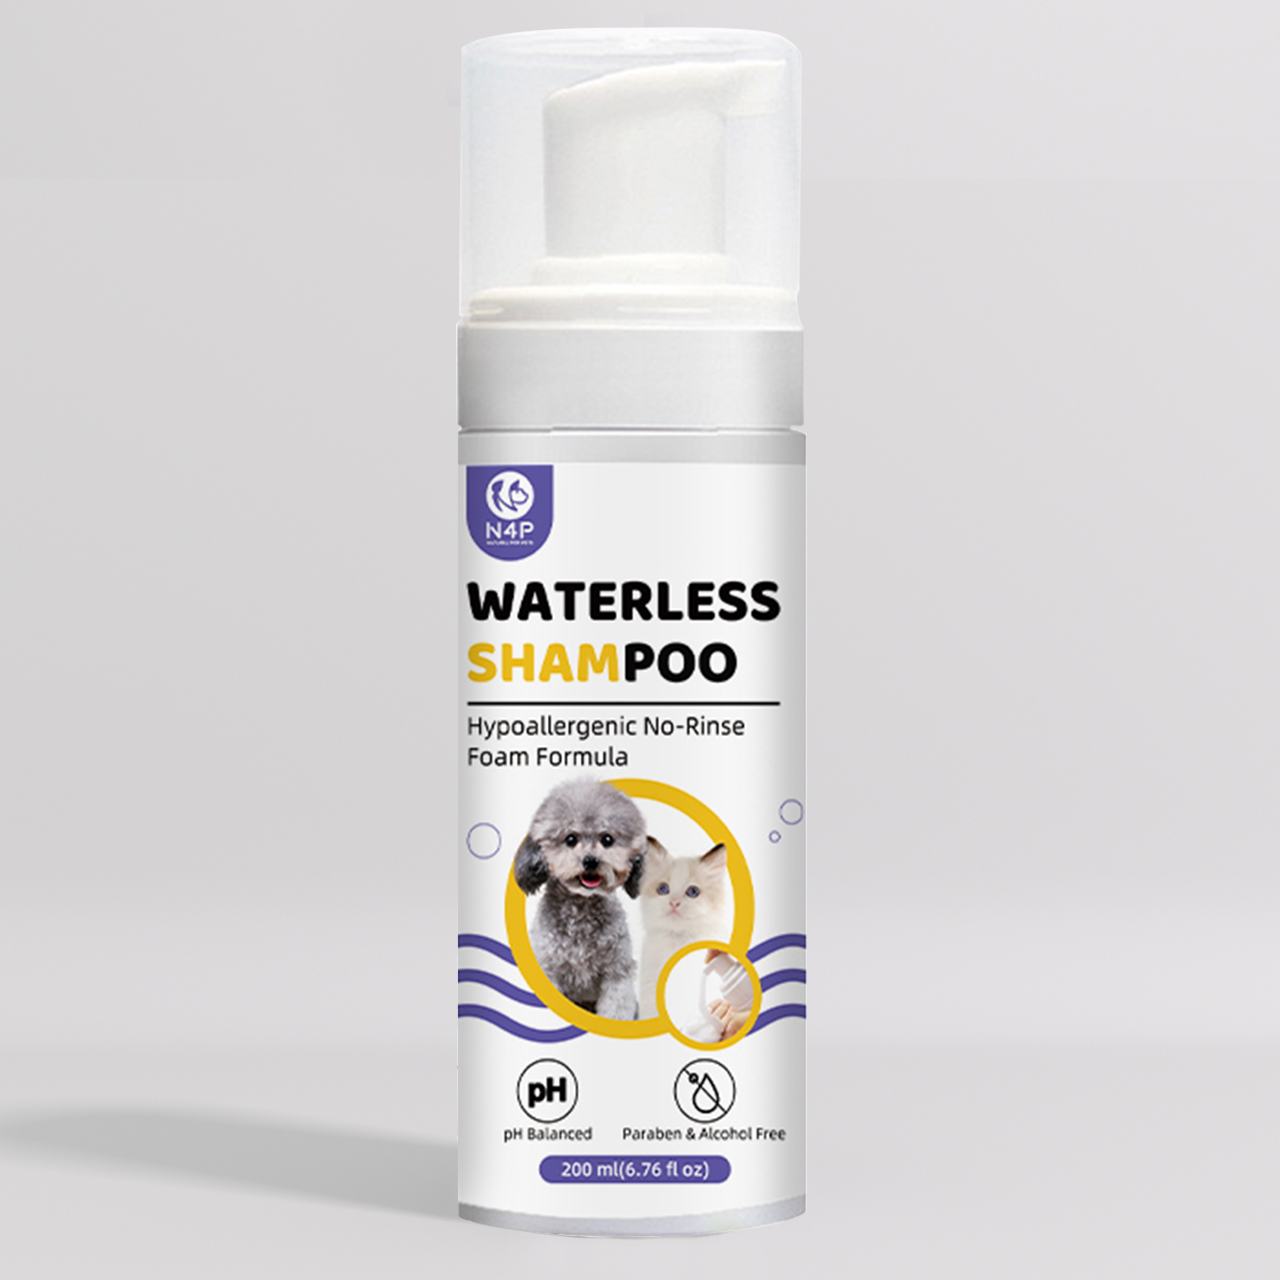 N4P No-Rinse Waterless Shampoo Foam for Cats: The Perfect Solution for Your Cats